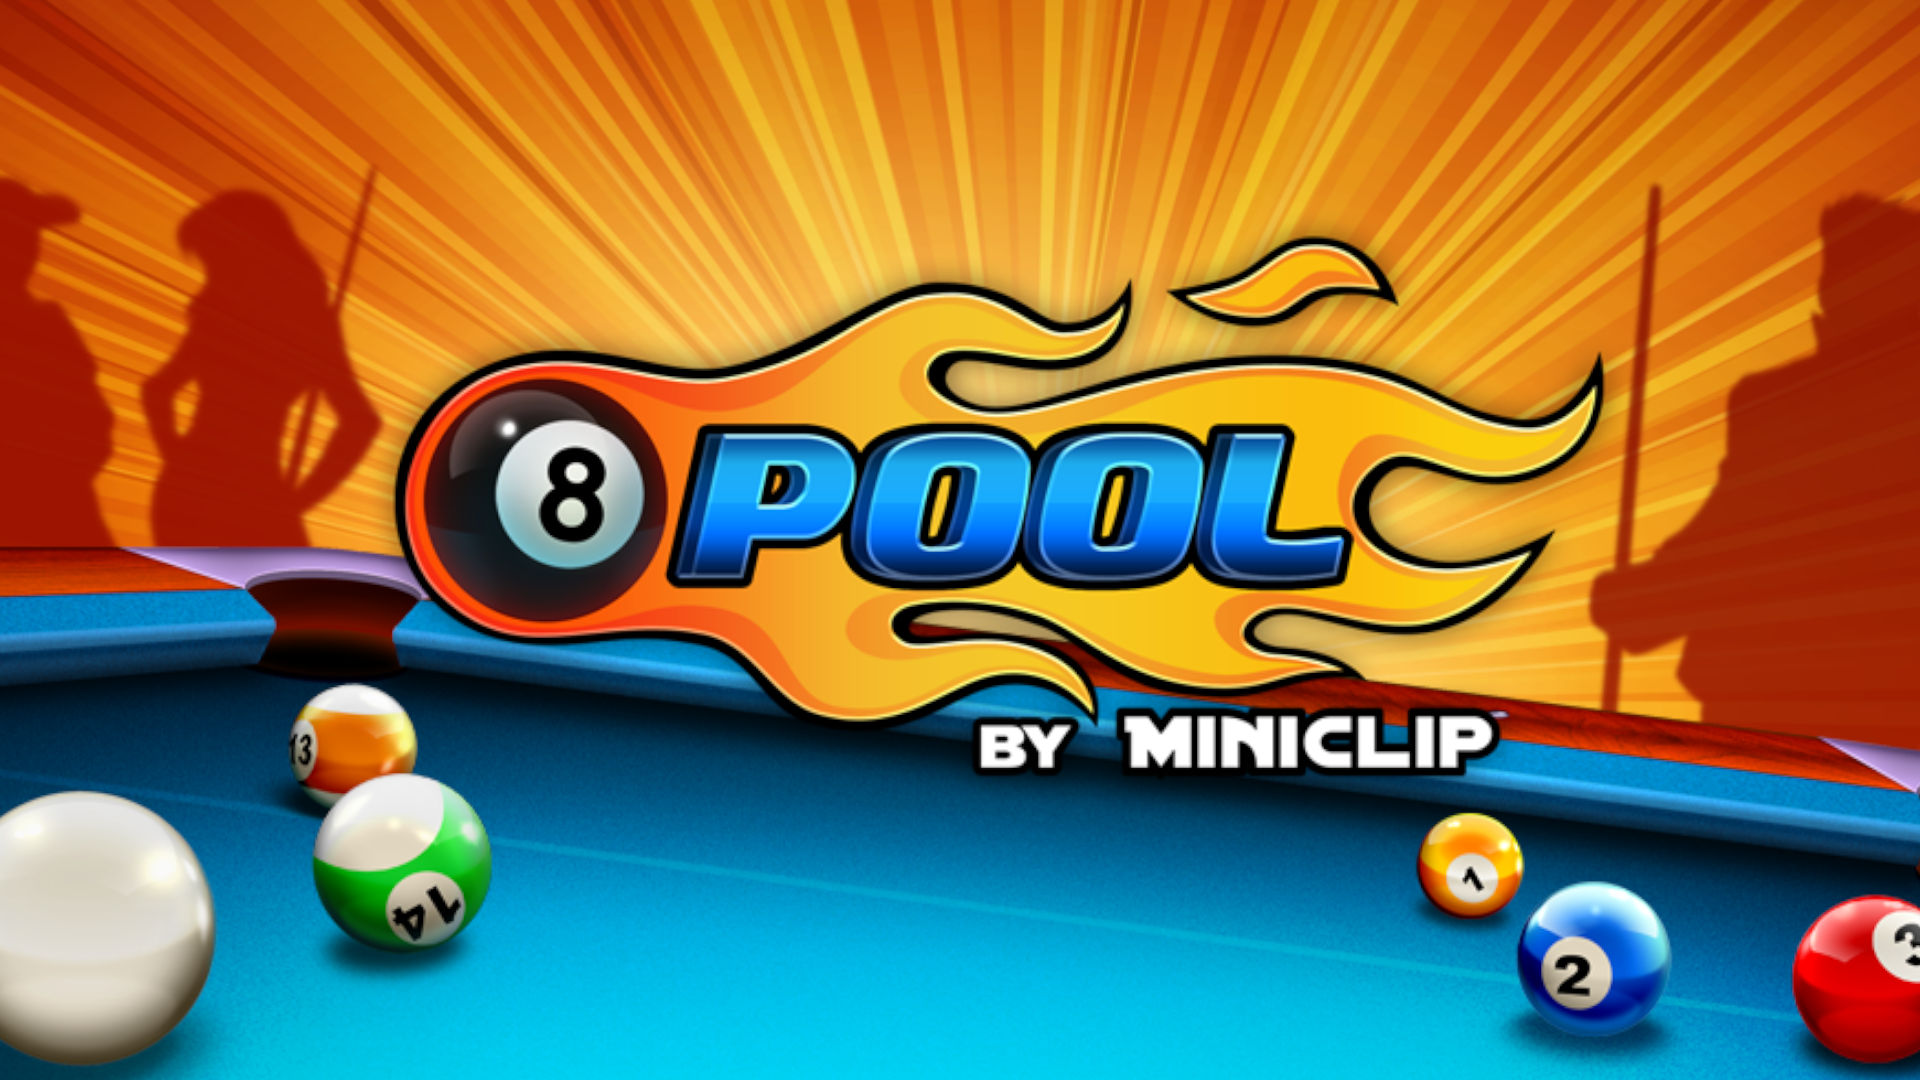 Games - New Video Game Releases 8 Ball Pool With Friends Test your